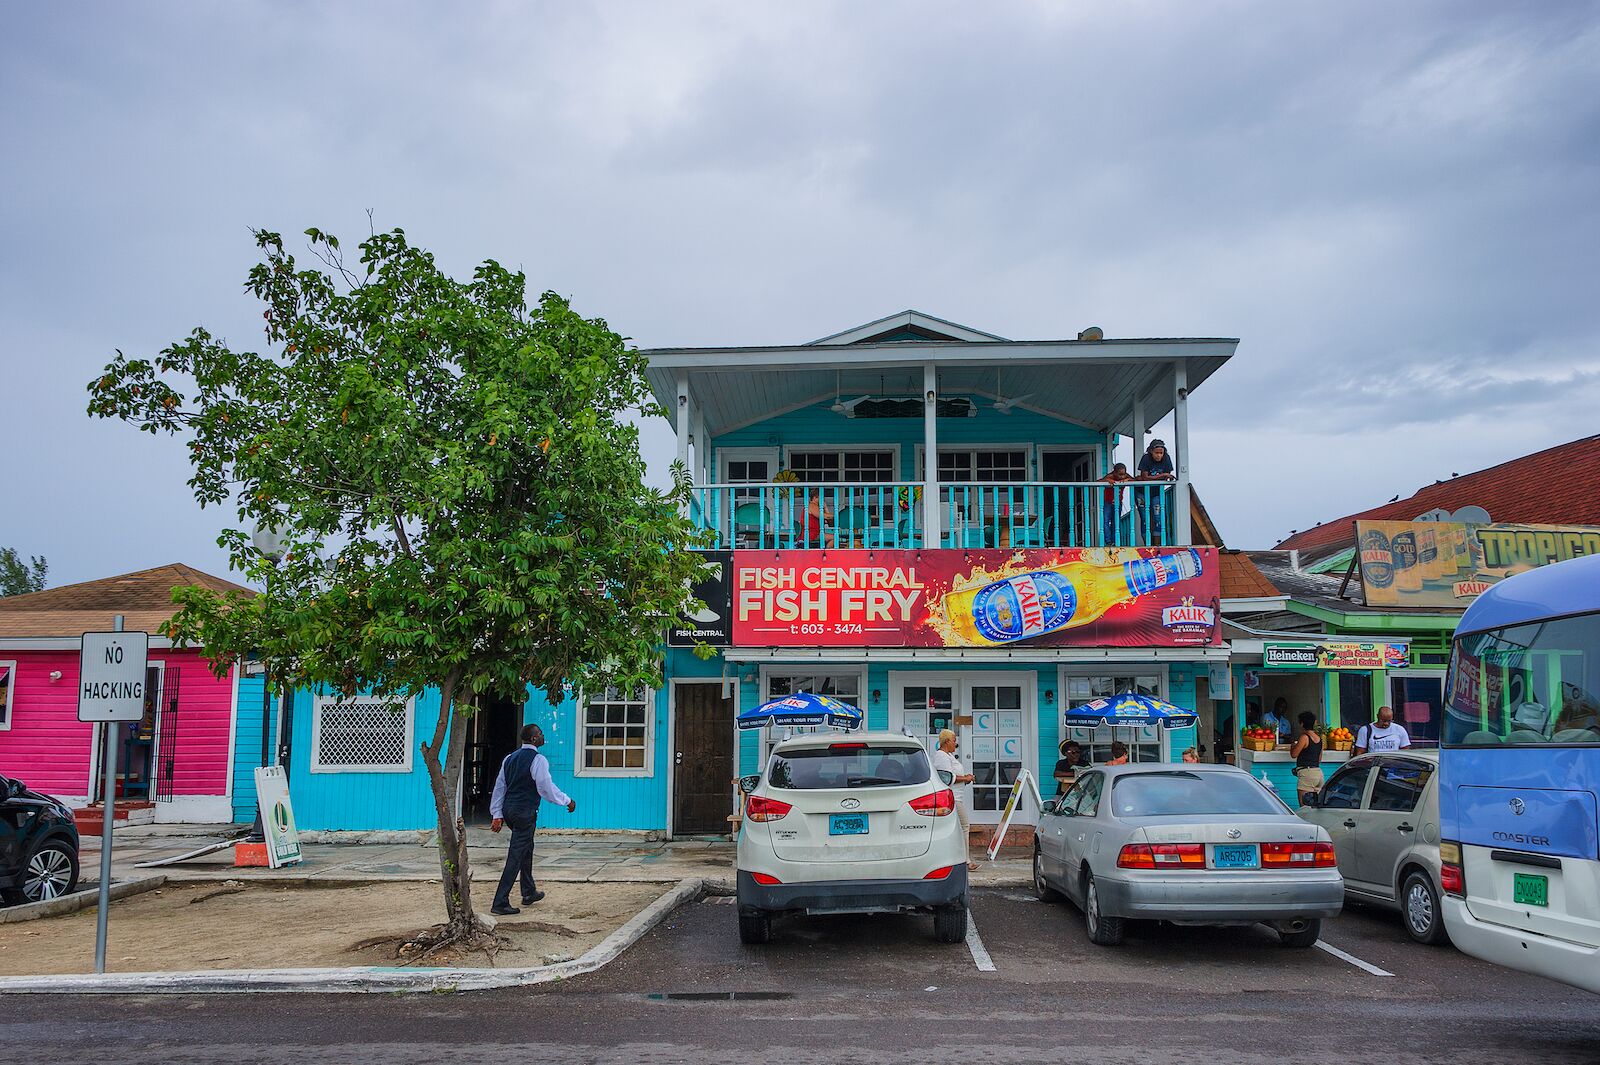 Nassau, Bahama - September 21/2019: Views of Arawak Cay Fish Fry village,of hand painted colorful structures providing Caribben fish food and drinks along the beach shore.